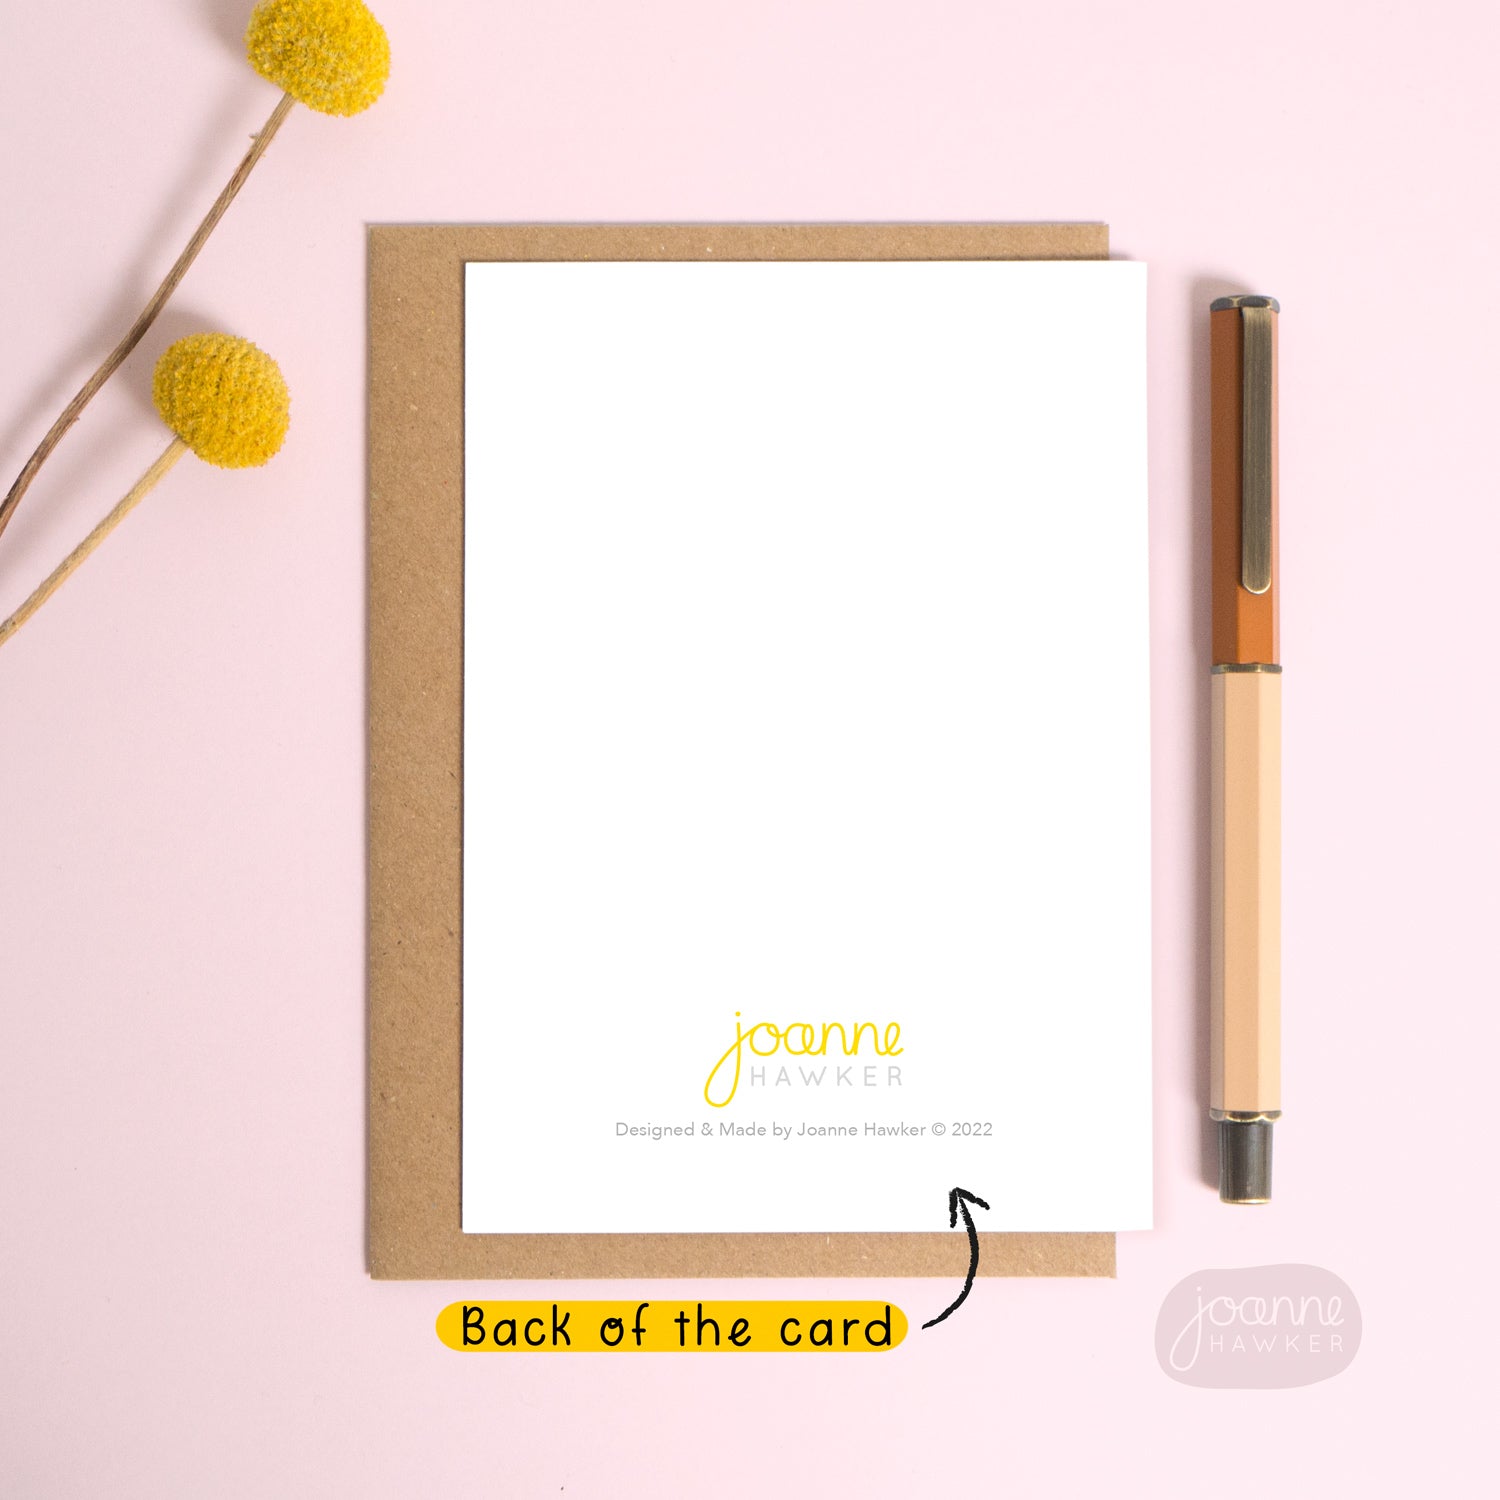 A blank card set on a pink background with a pop of yellow flowers and a pen for scale. The text on the image simply tells you that is this the back of the card.